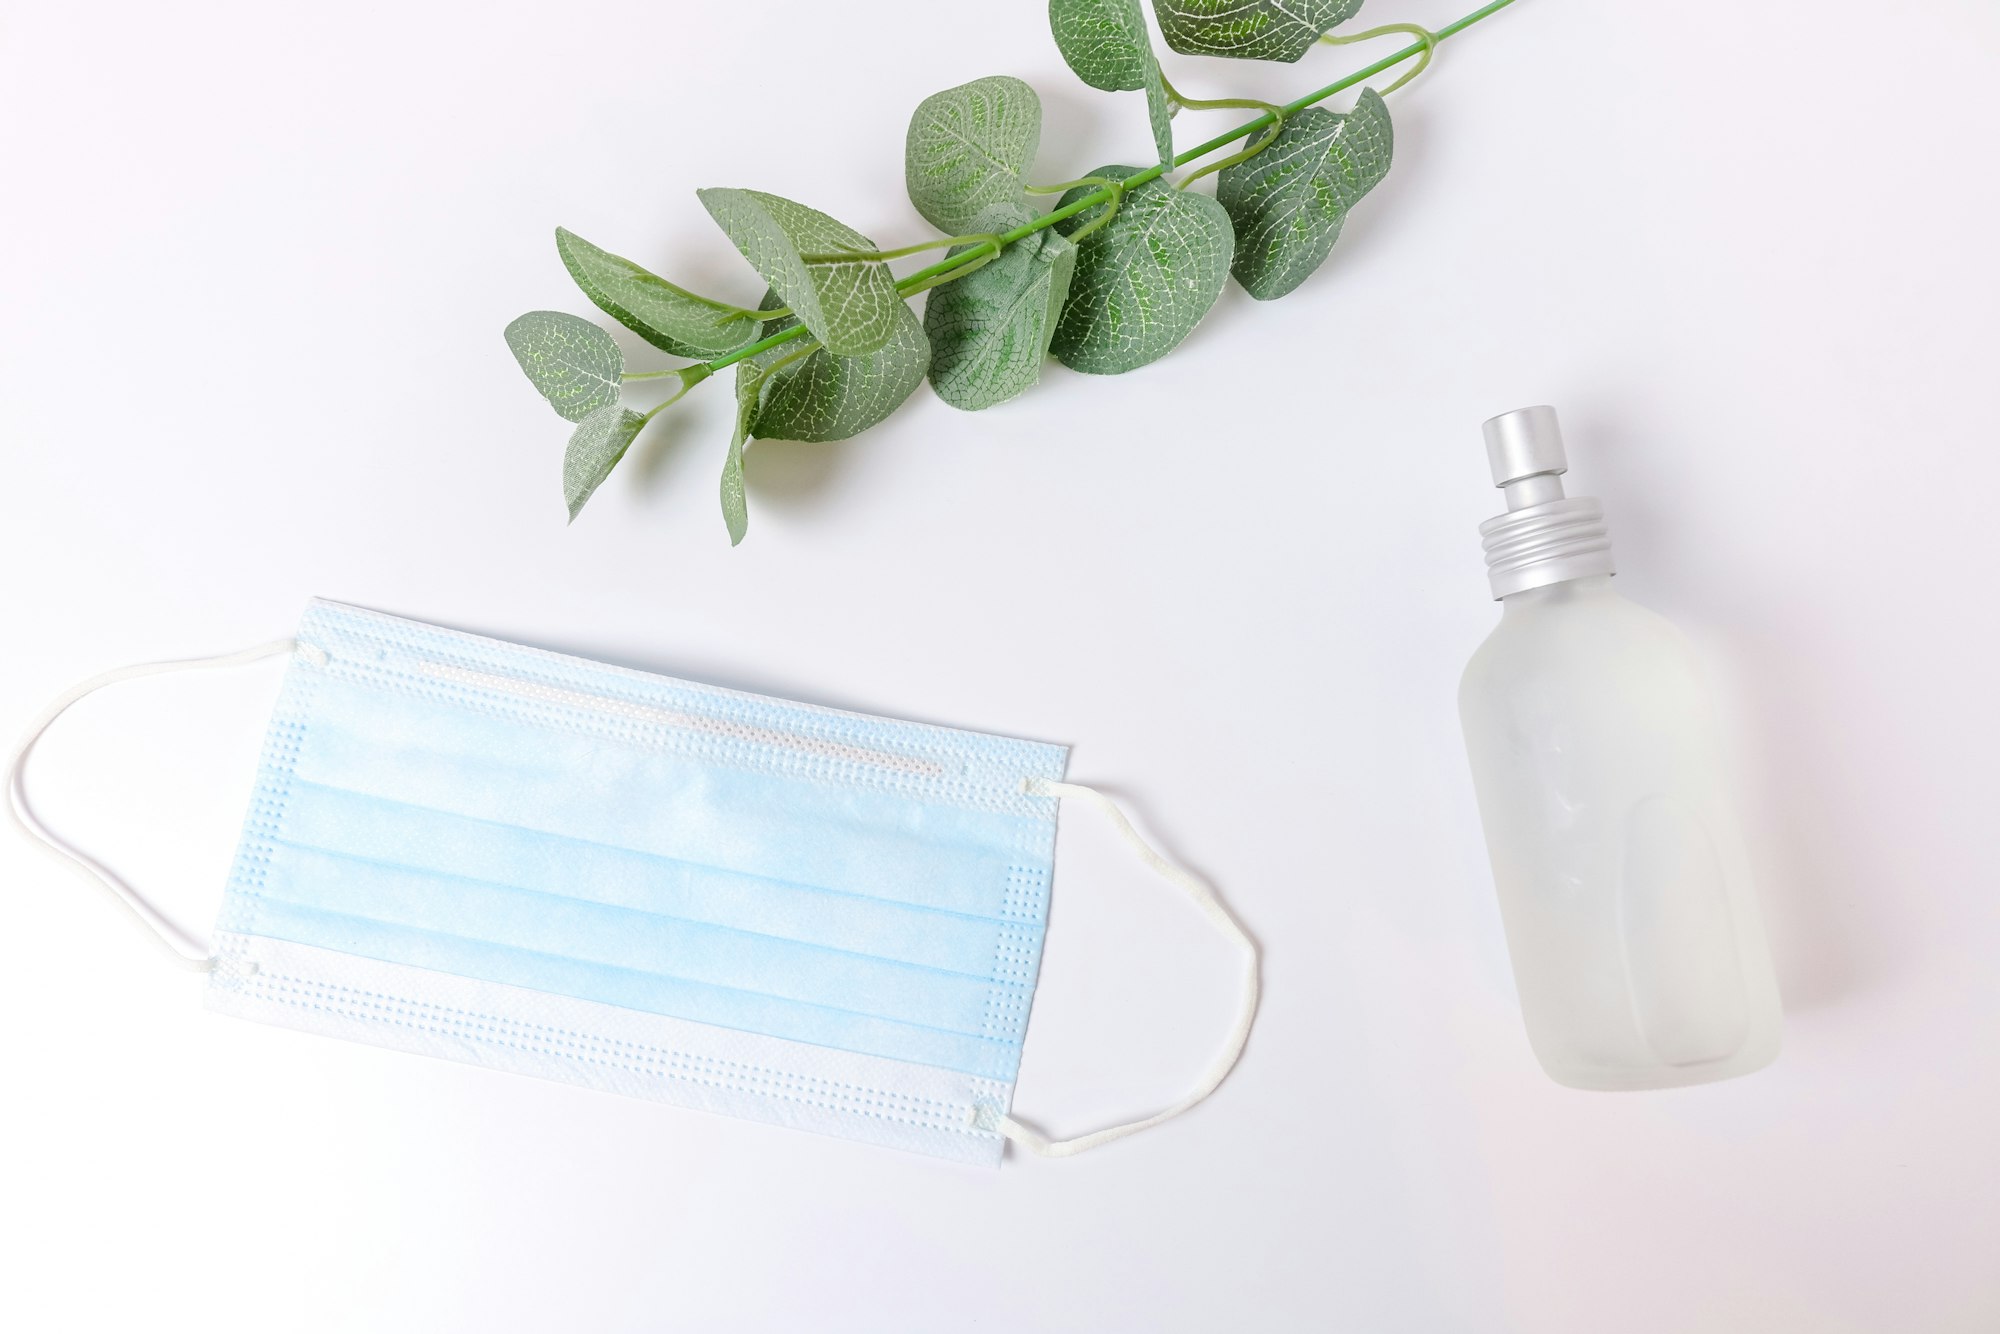 Face mask with cleaning spray bottle or hand sanitizer